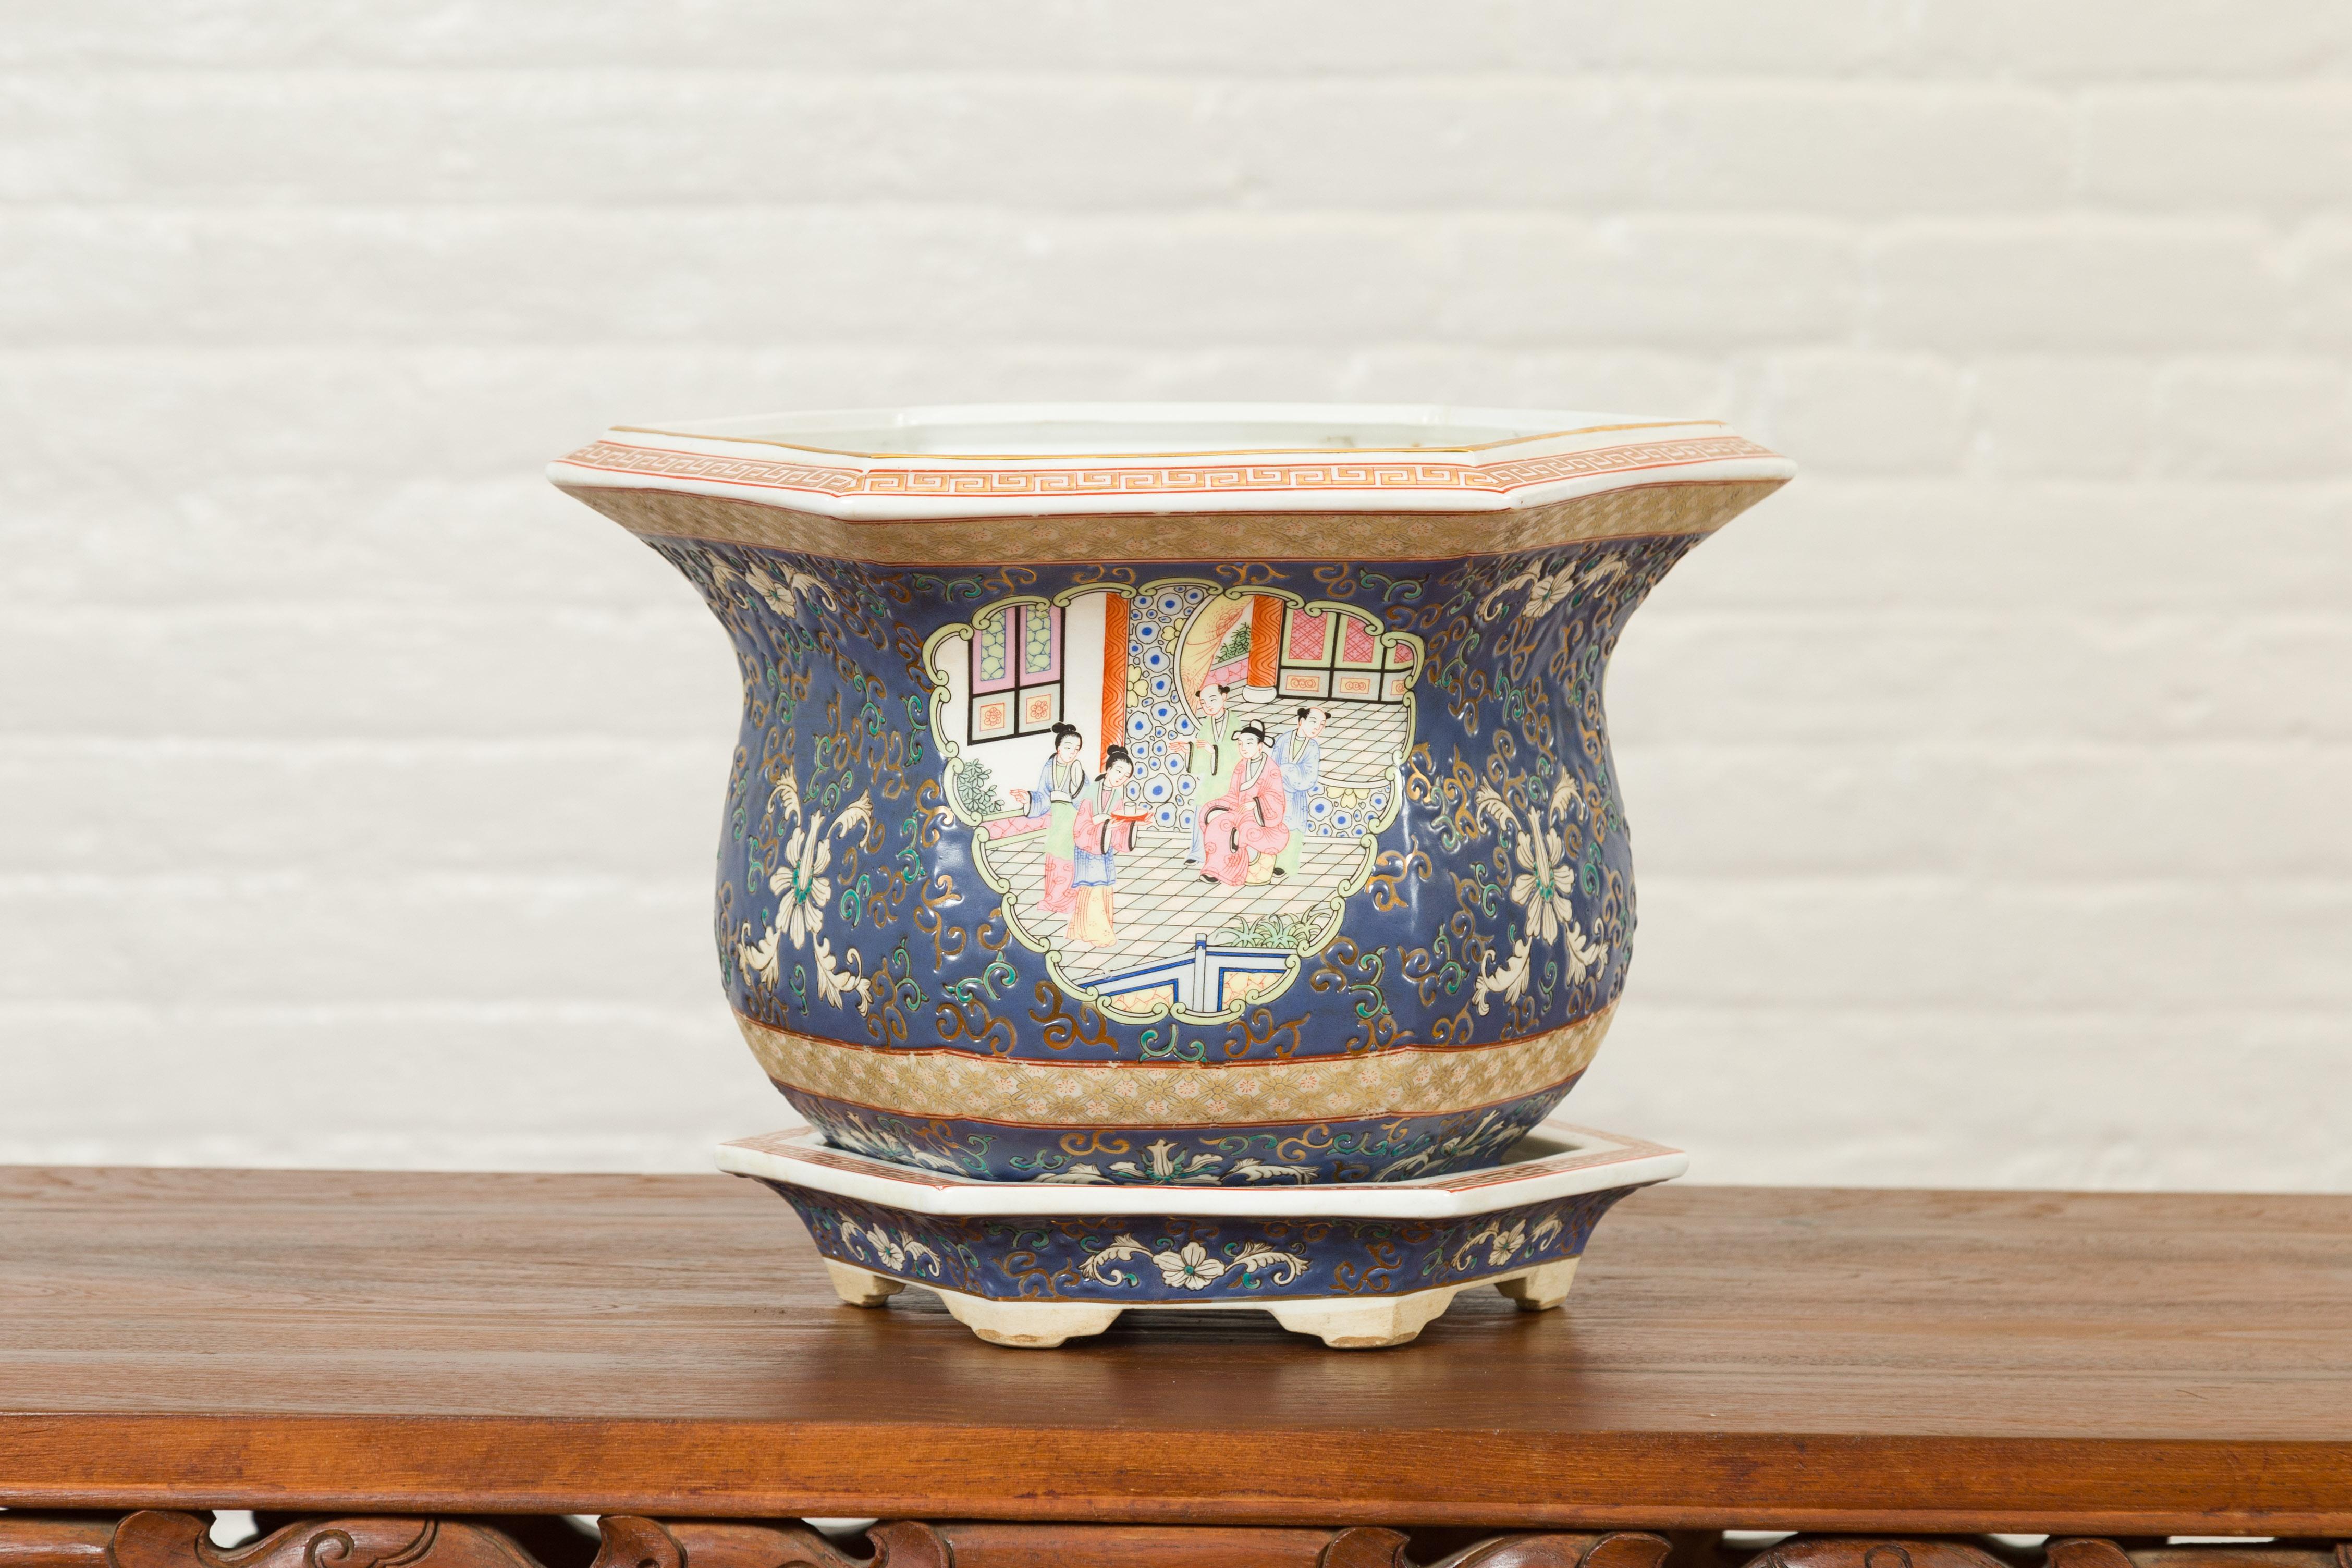 Chinese Hexagonal Planter with Hand Painted Courtyard Scenes Depicting Maidens 10